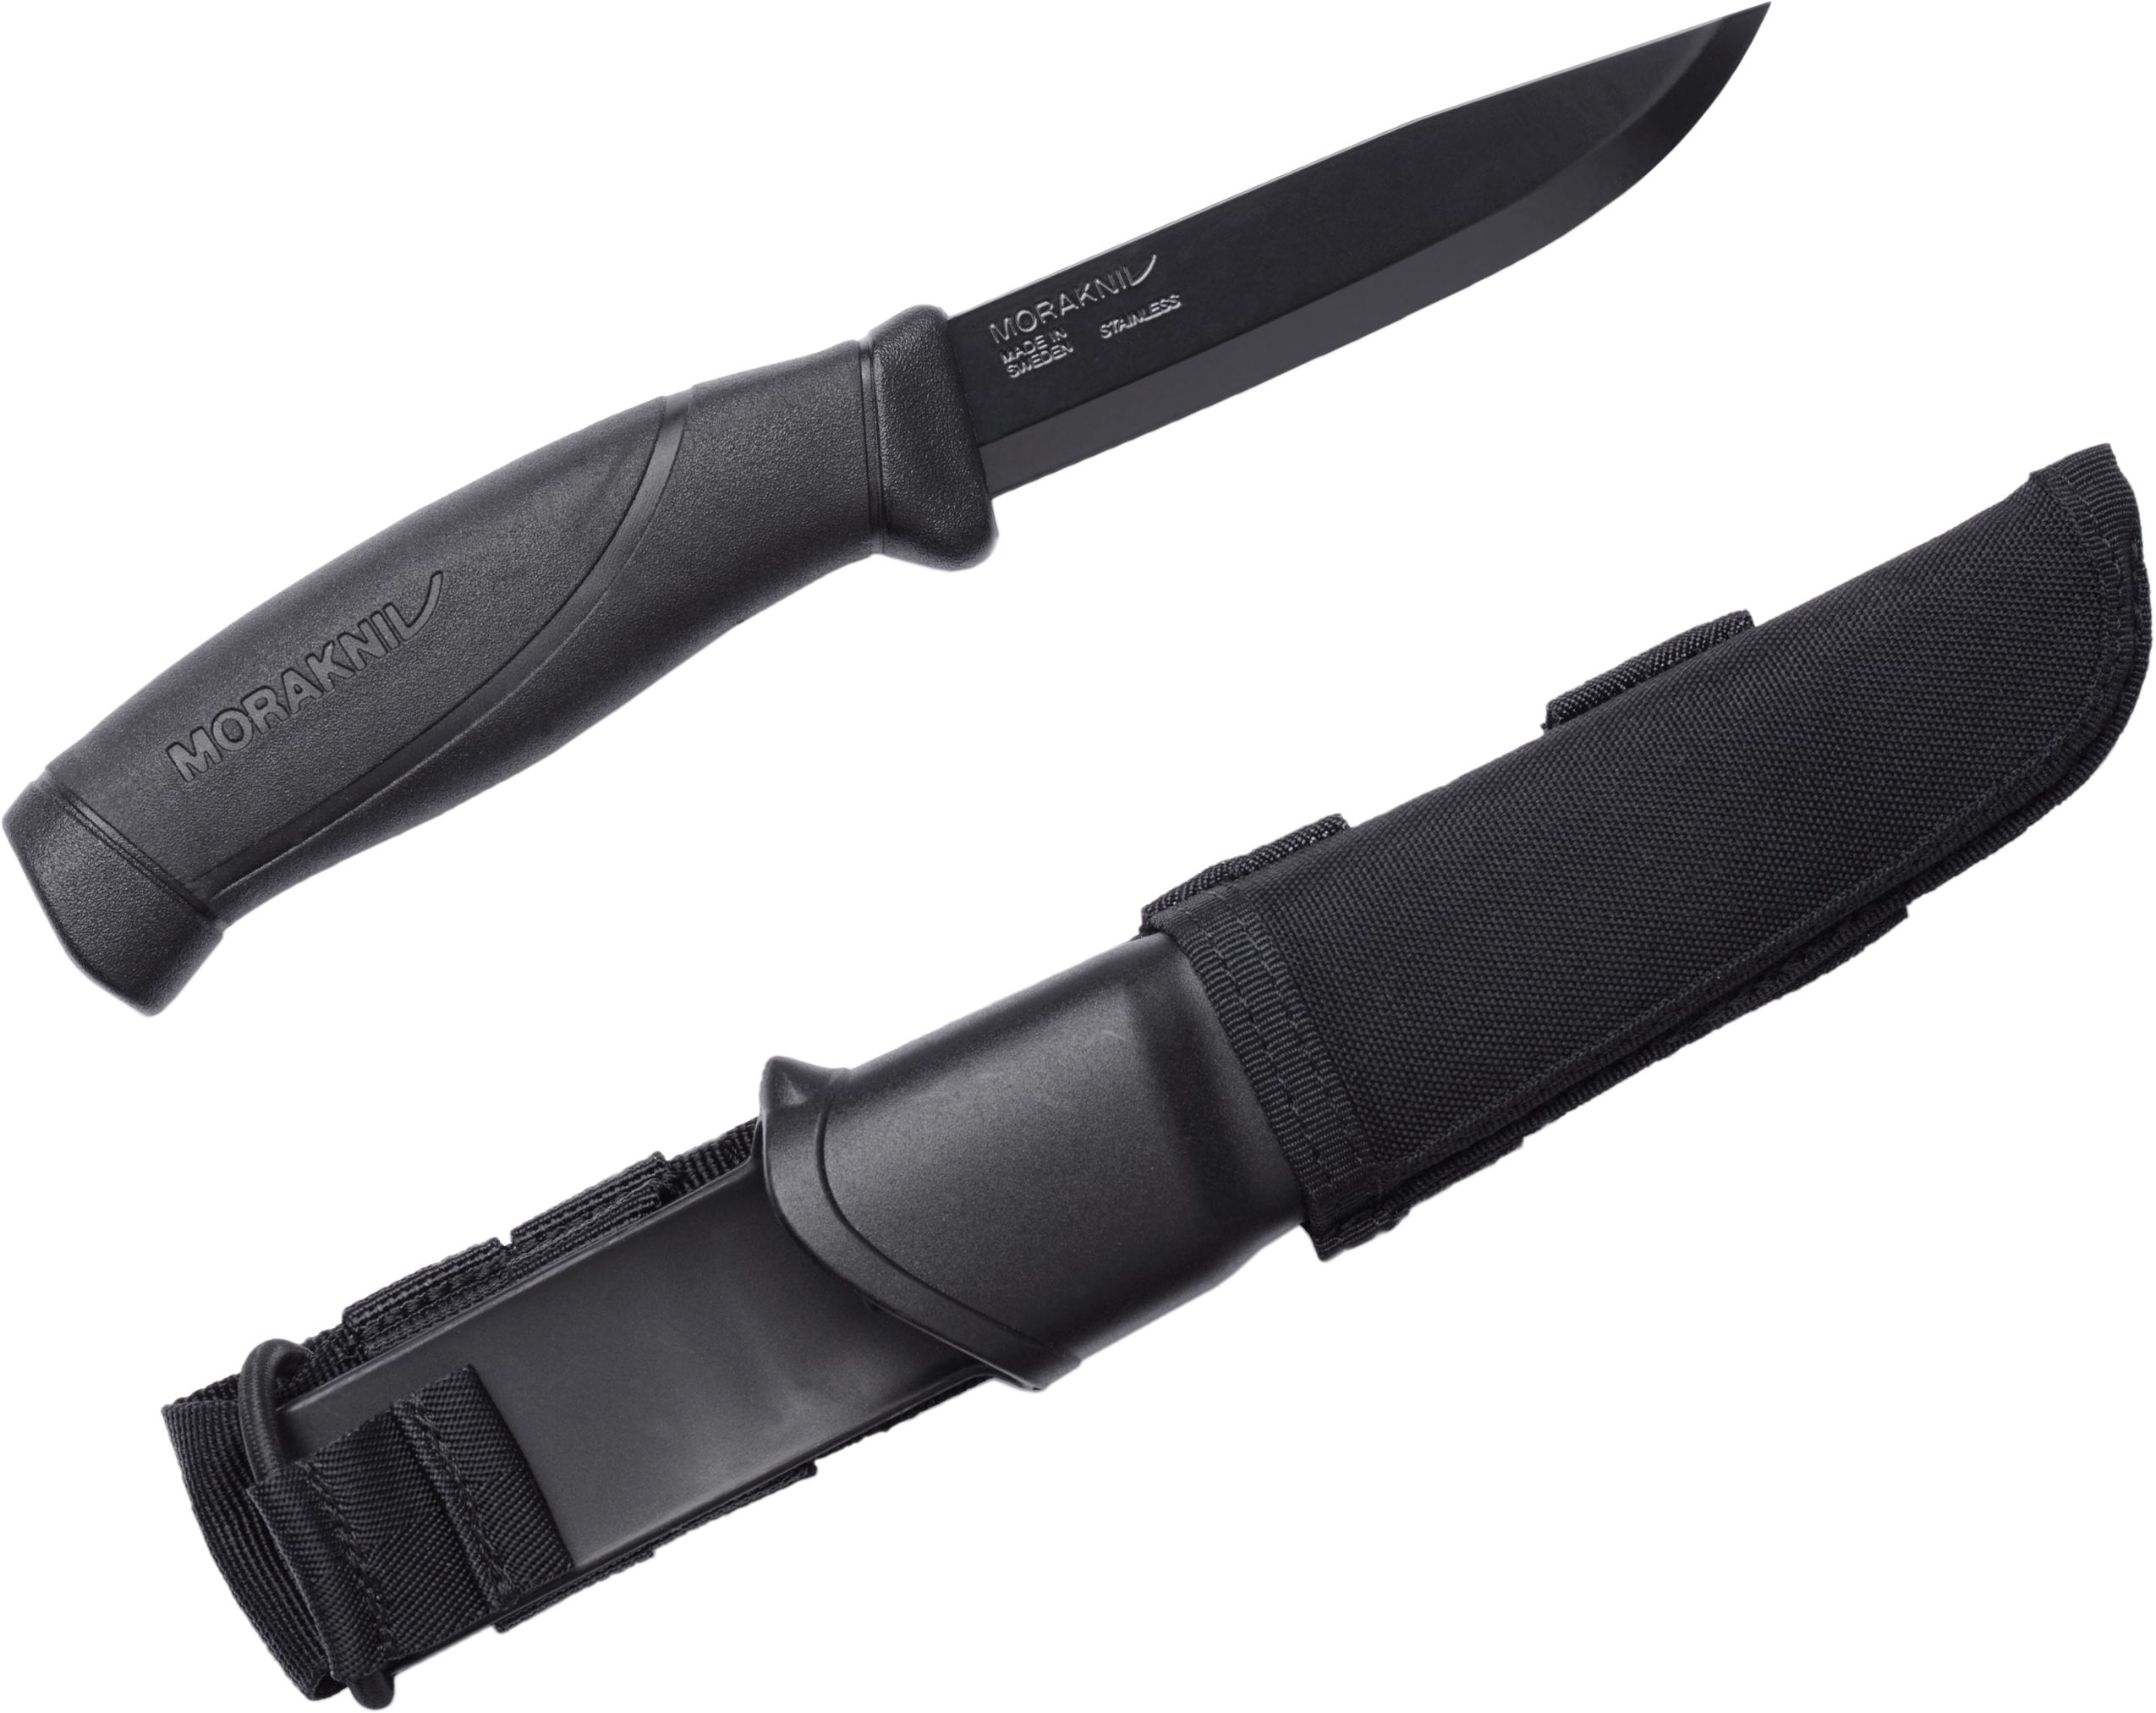 Mora Knives Tactical SRT Fixed Blade, Stainless Steel, Black Rubber Handle